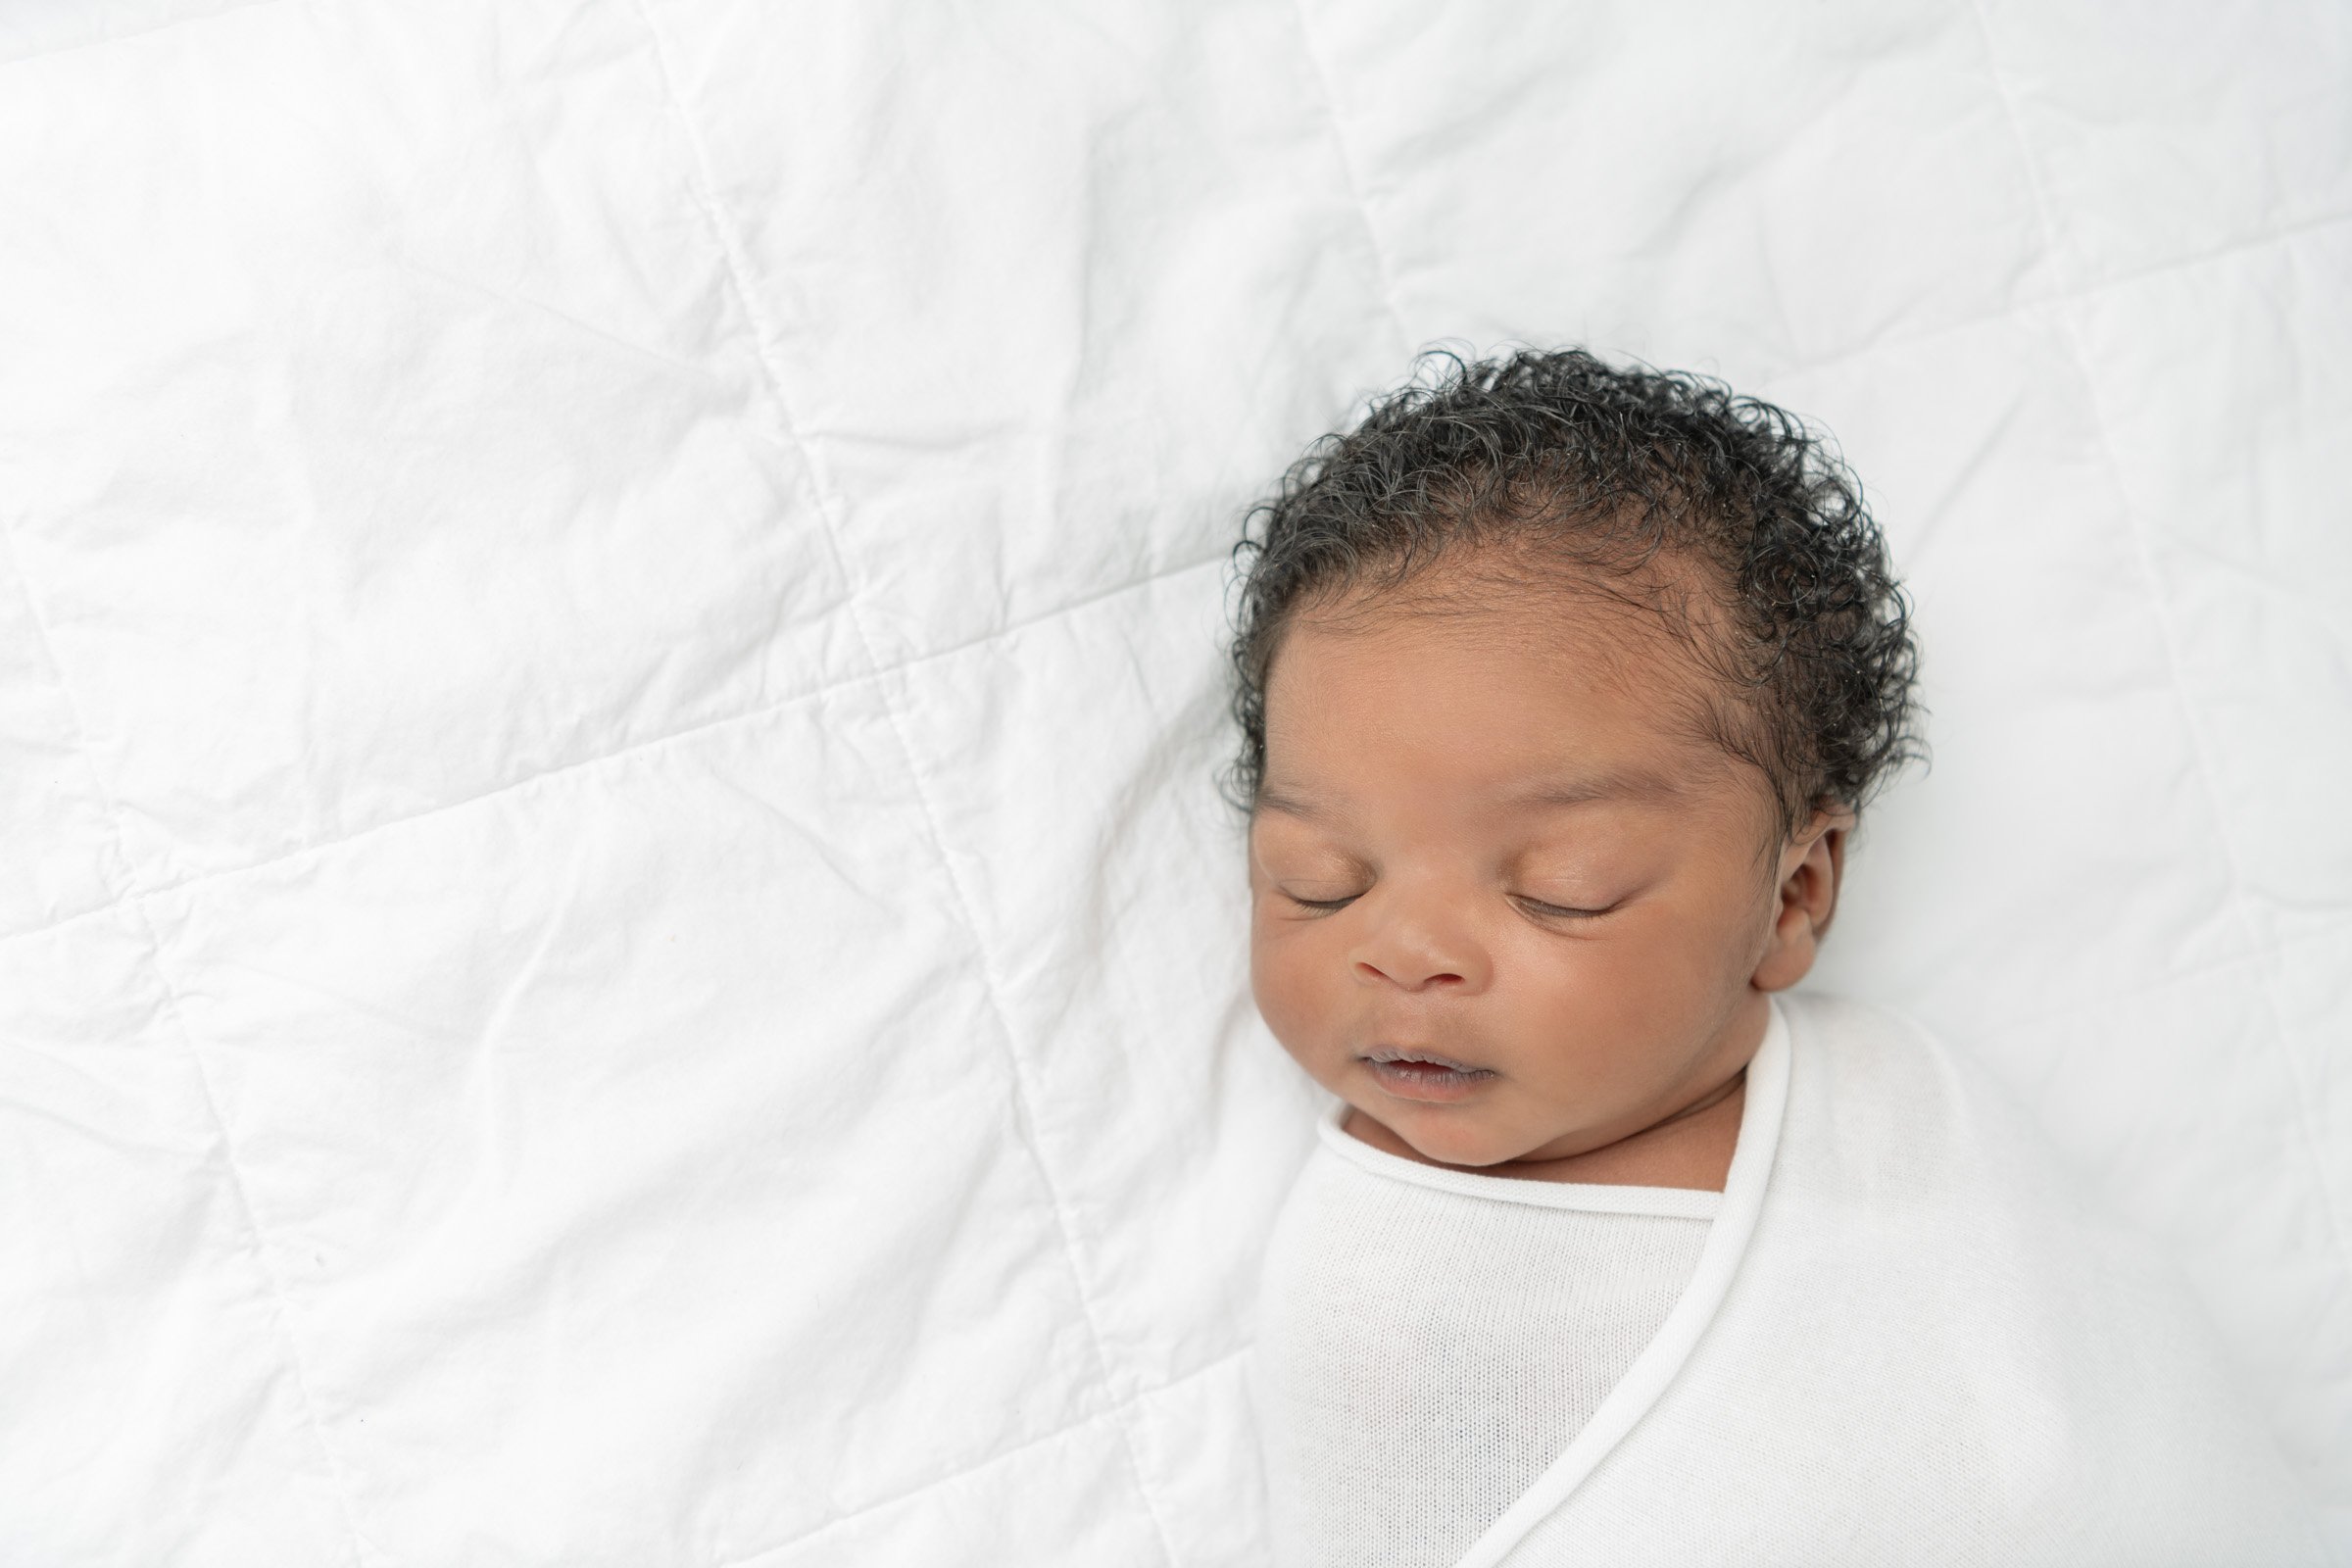  New Jersey photographer Nicole Hawkins Photography captures a swaddled sleeping baby on a white blanket. swaddled newborn curly black hair #nicolehawkinsphotography #NJbabyphotography #newbornportraits #NewJerseyStudioPhotography #newbornsession 